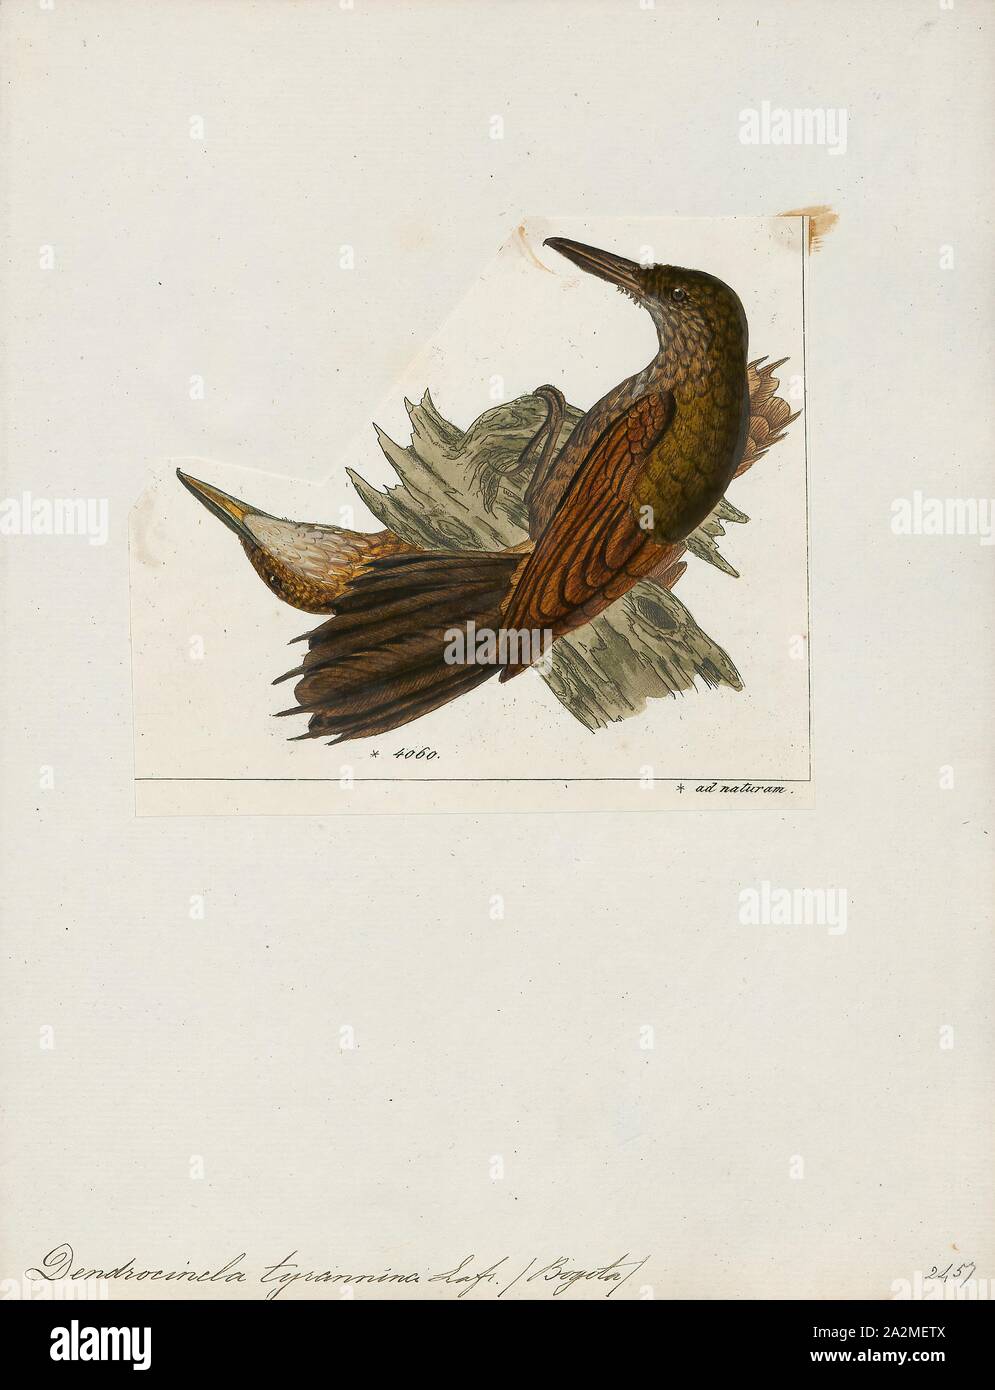 Dendrocincla tyrannina, Print, The tyrannine woodcreeper (Dendrocincla tyrannina) is a species of bird in the Furnariidae family. It is found in Bolivia, Colombia, Ecuador, Peru, and Venezuela. Its natural habitat is subtropical or tropical moist montane forests., 1820-1860 Stock Photo